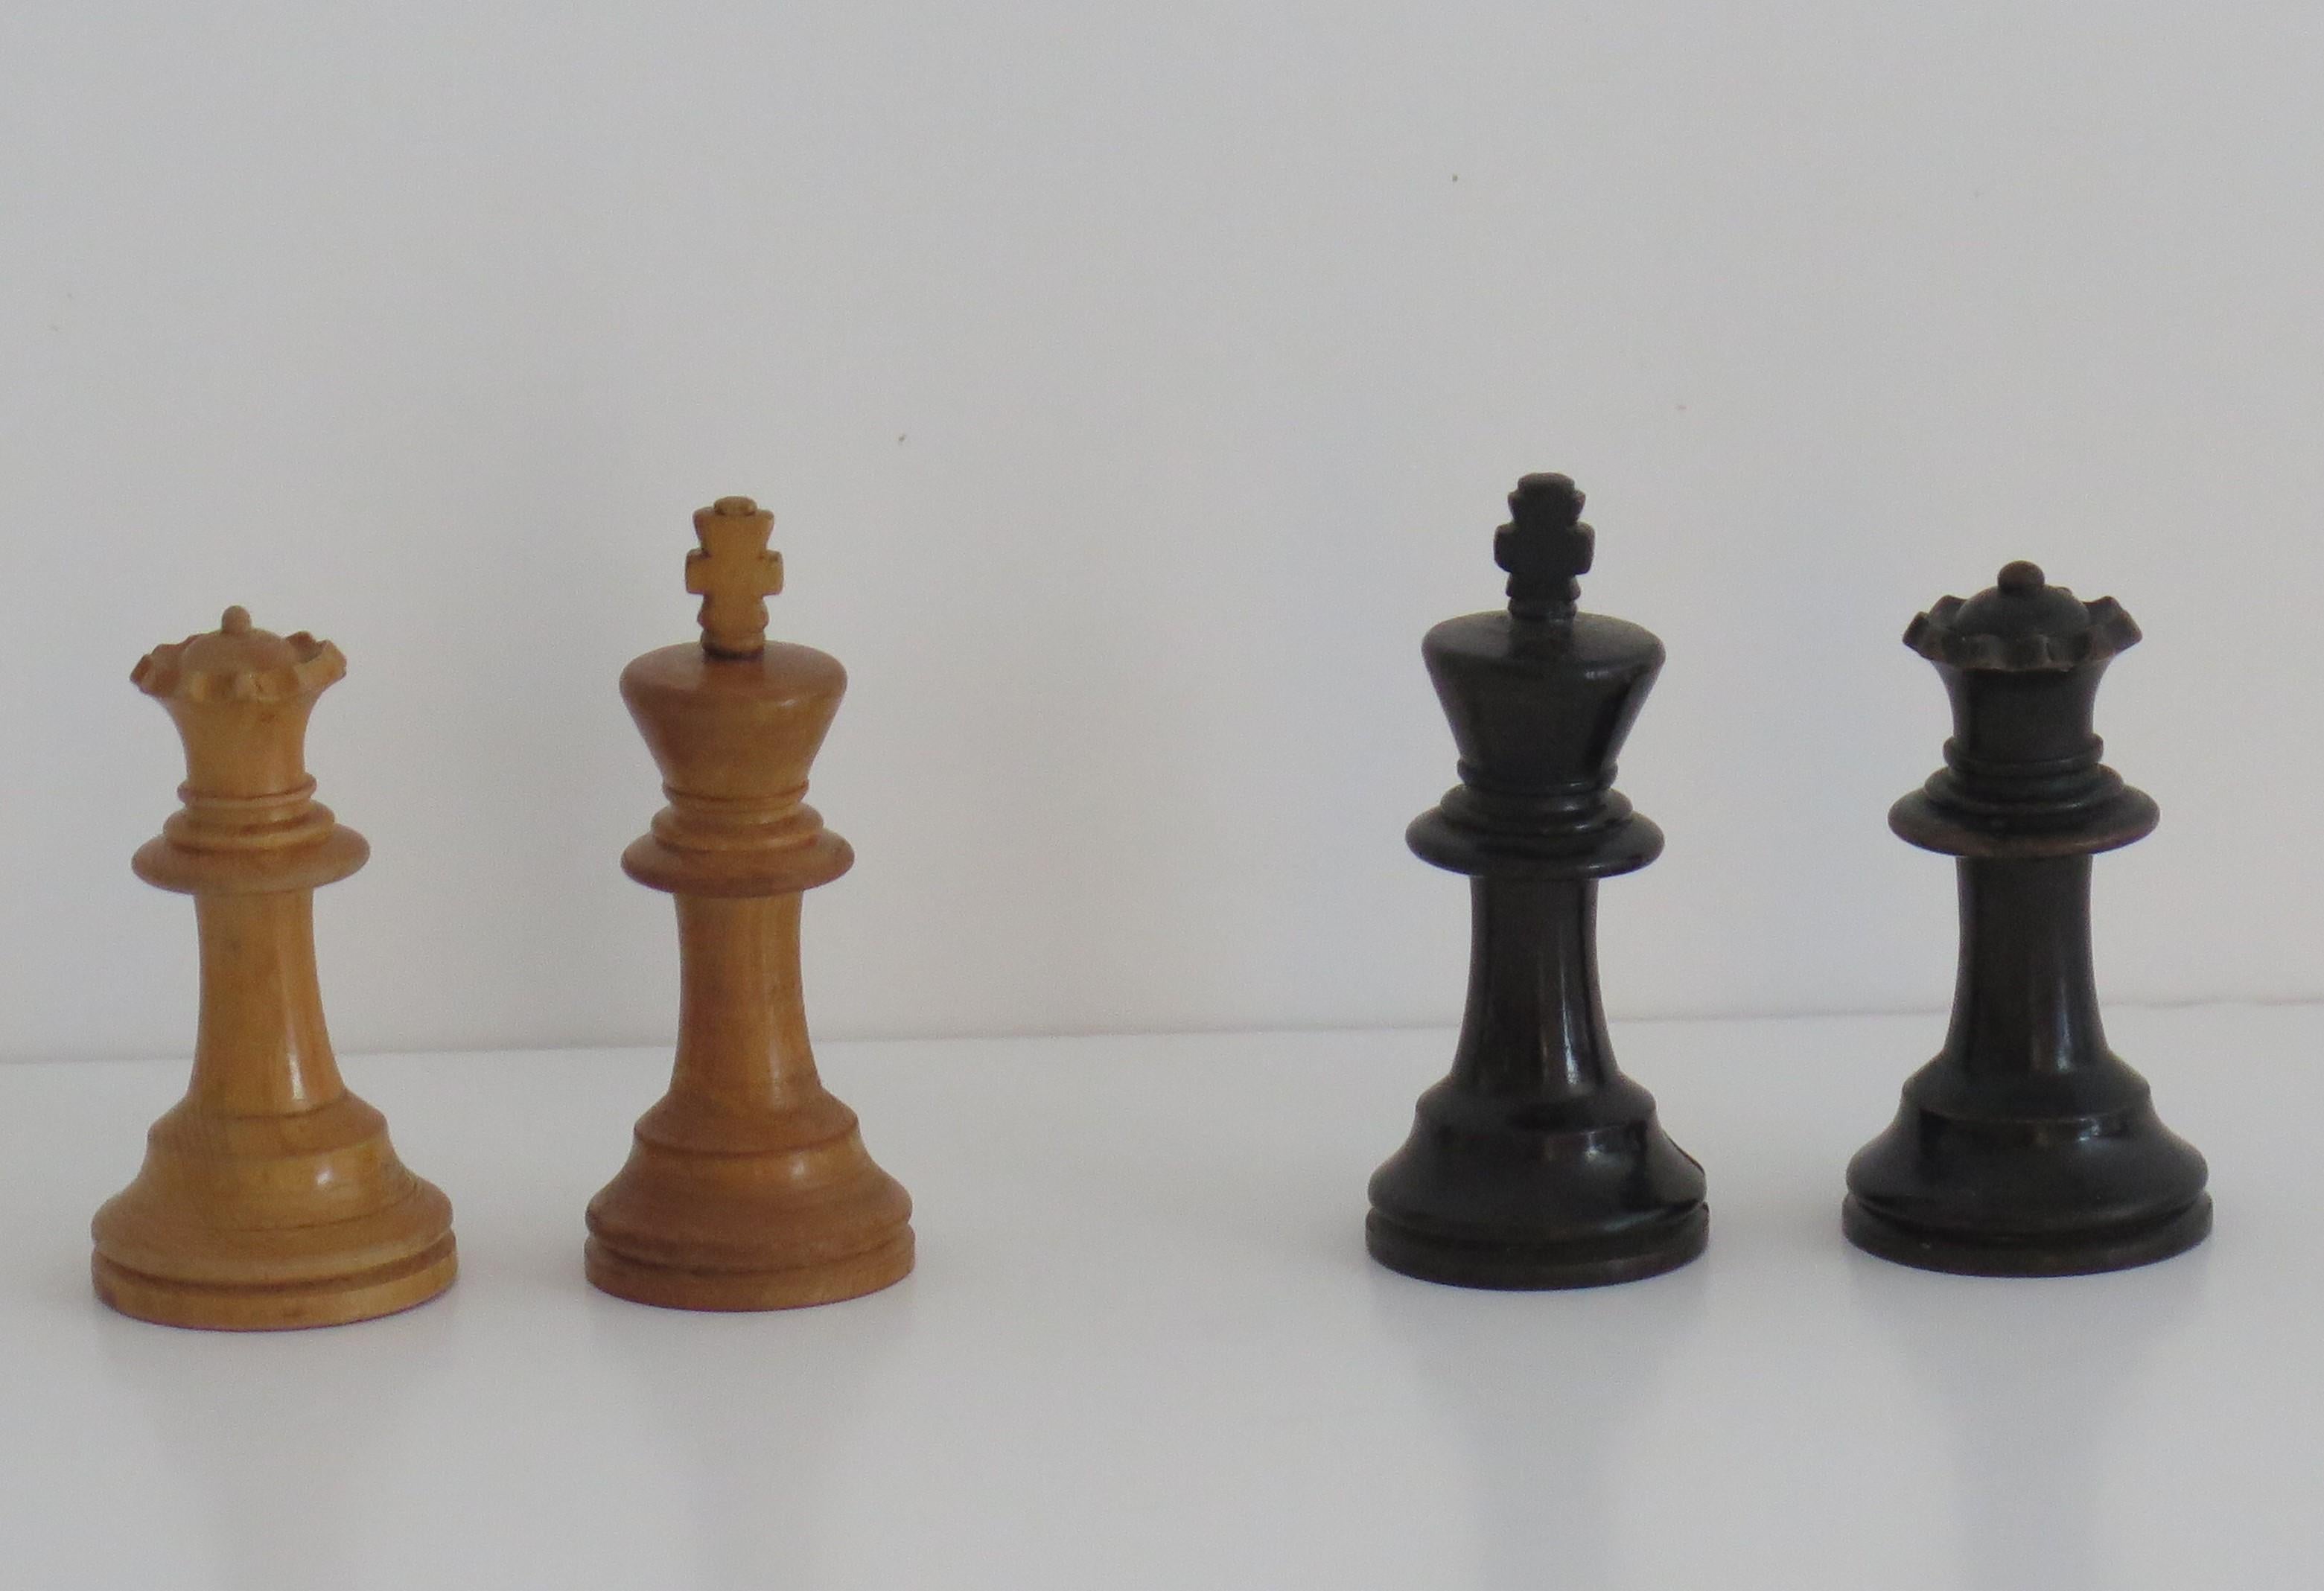 Hand-Crafted Staunton Fierce Knight Weighted Chess Set Kings in Jointed Box, 19th Century